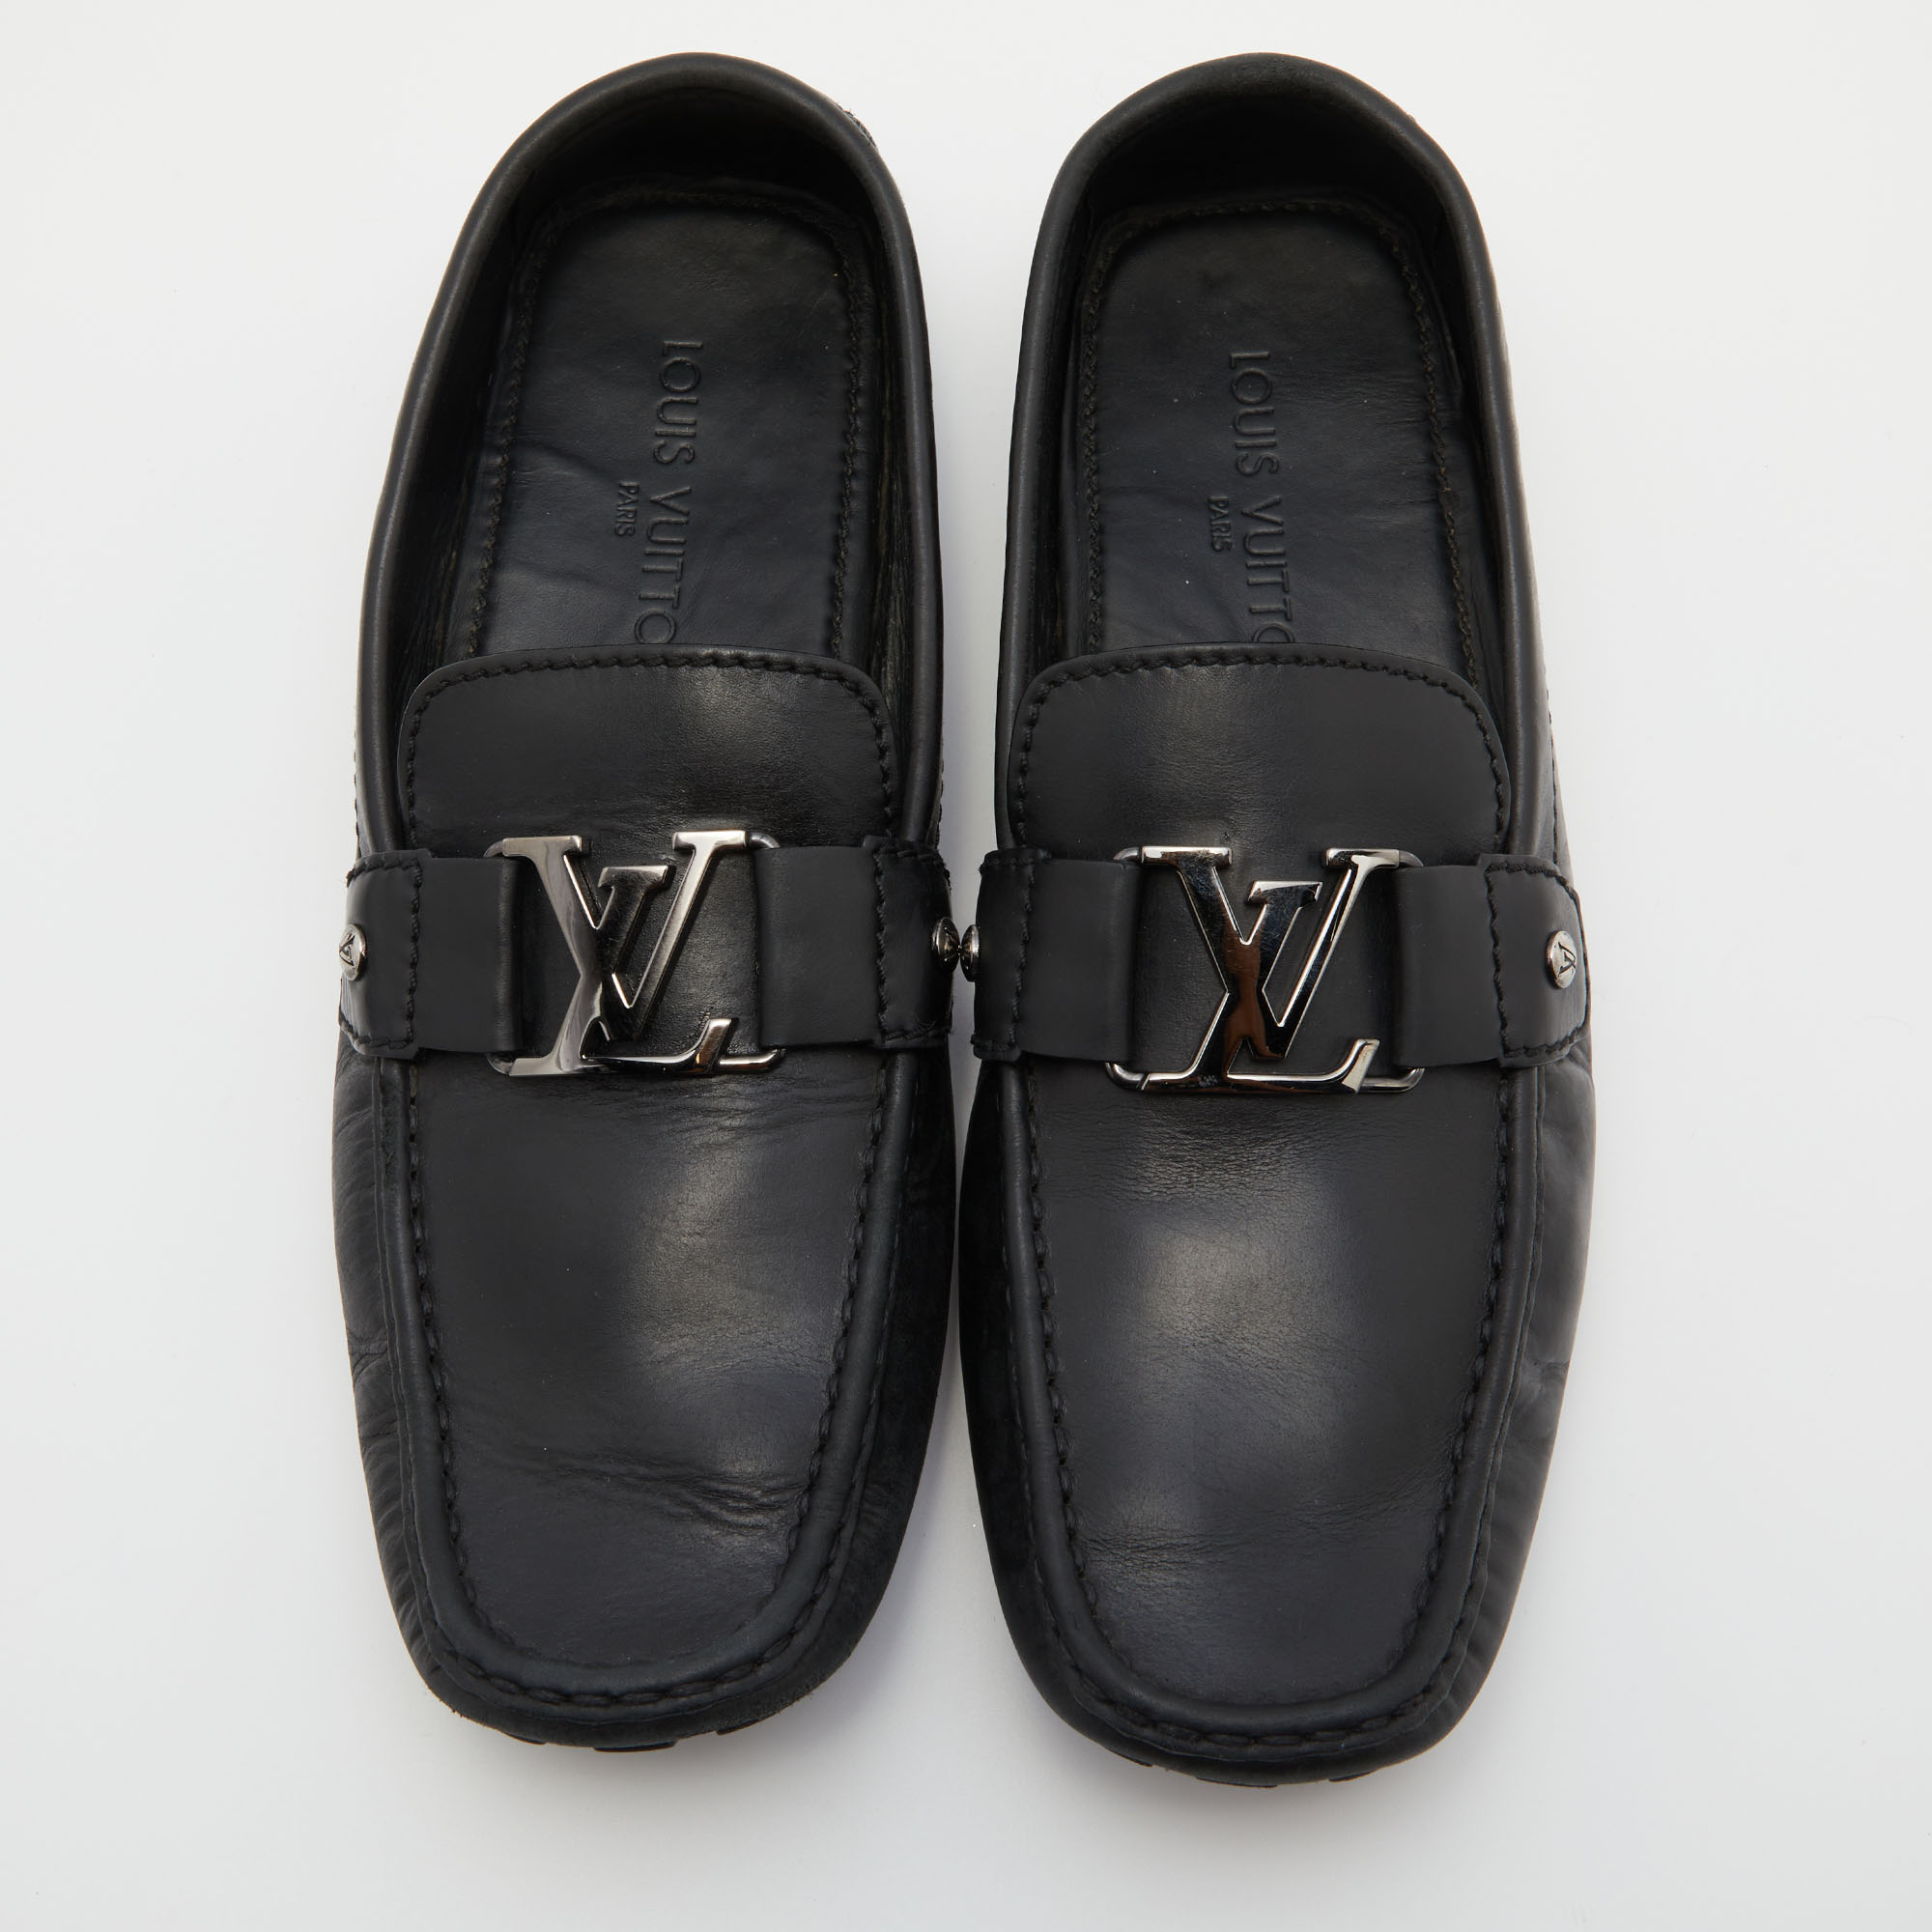 Louis Vuitton Black Leather Monte Carlo Slip On Loafers Size 42.5